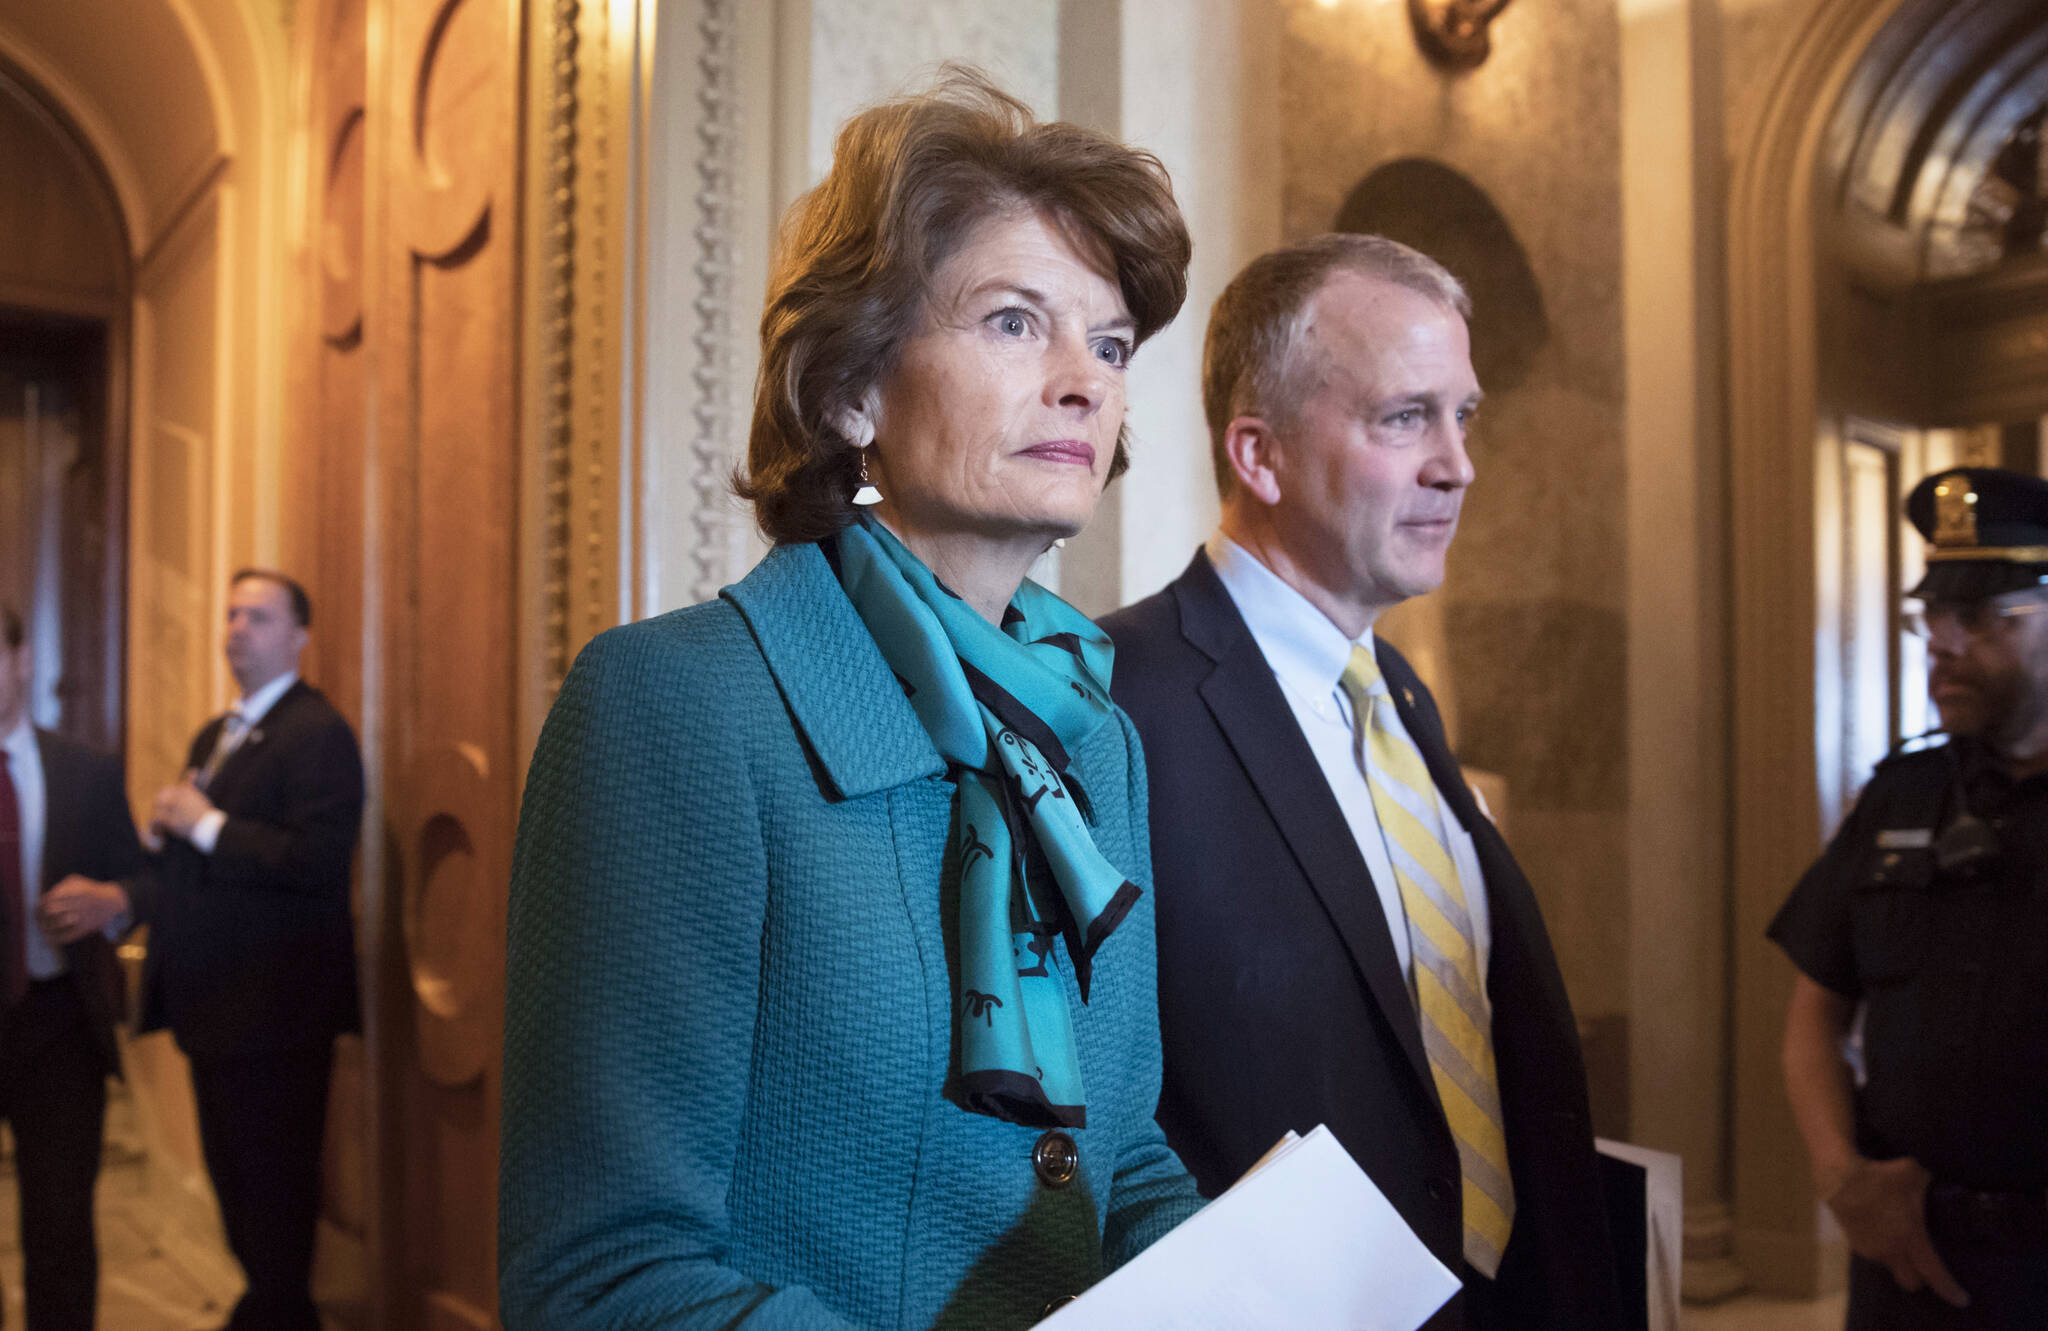 Sen. Lisa Murkowski, R-Alaska, and Sen. Dan Sullivan, R-Alaska, leave the chamber after a vote on Capitol Hill in Washington on May 10, 2017. A rural Alaska man who threatened to kill both of Alaska’s U.S. senators in a series of profanity-laden messages left at their congressional offices will be sentenced Friday, April 8, 2022. Jay Allen Johnson, who said he was too old and ill to carry out his threats, partially blamed his behavior on the mixture of pain medications and alcohol and the isolation that was prevalent during the five-month span of 2021 when he left the threatening voicemails. (AP Photo / J. Scott Applewhite)